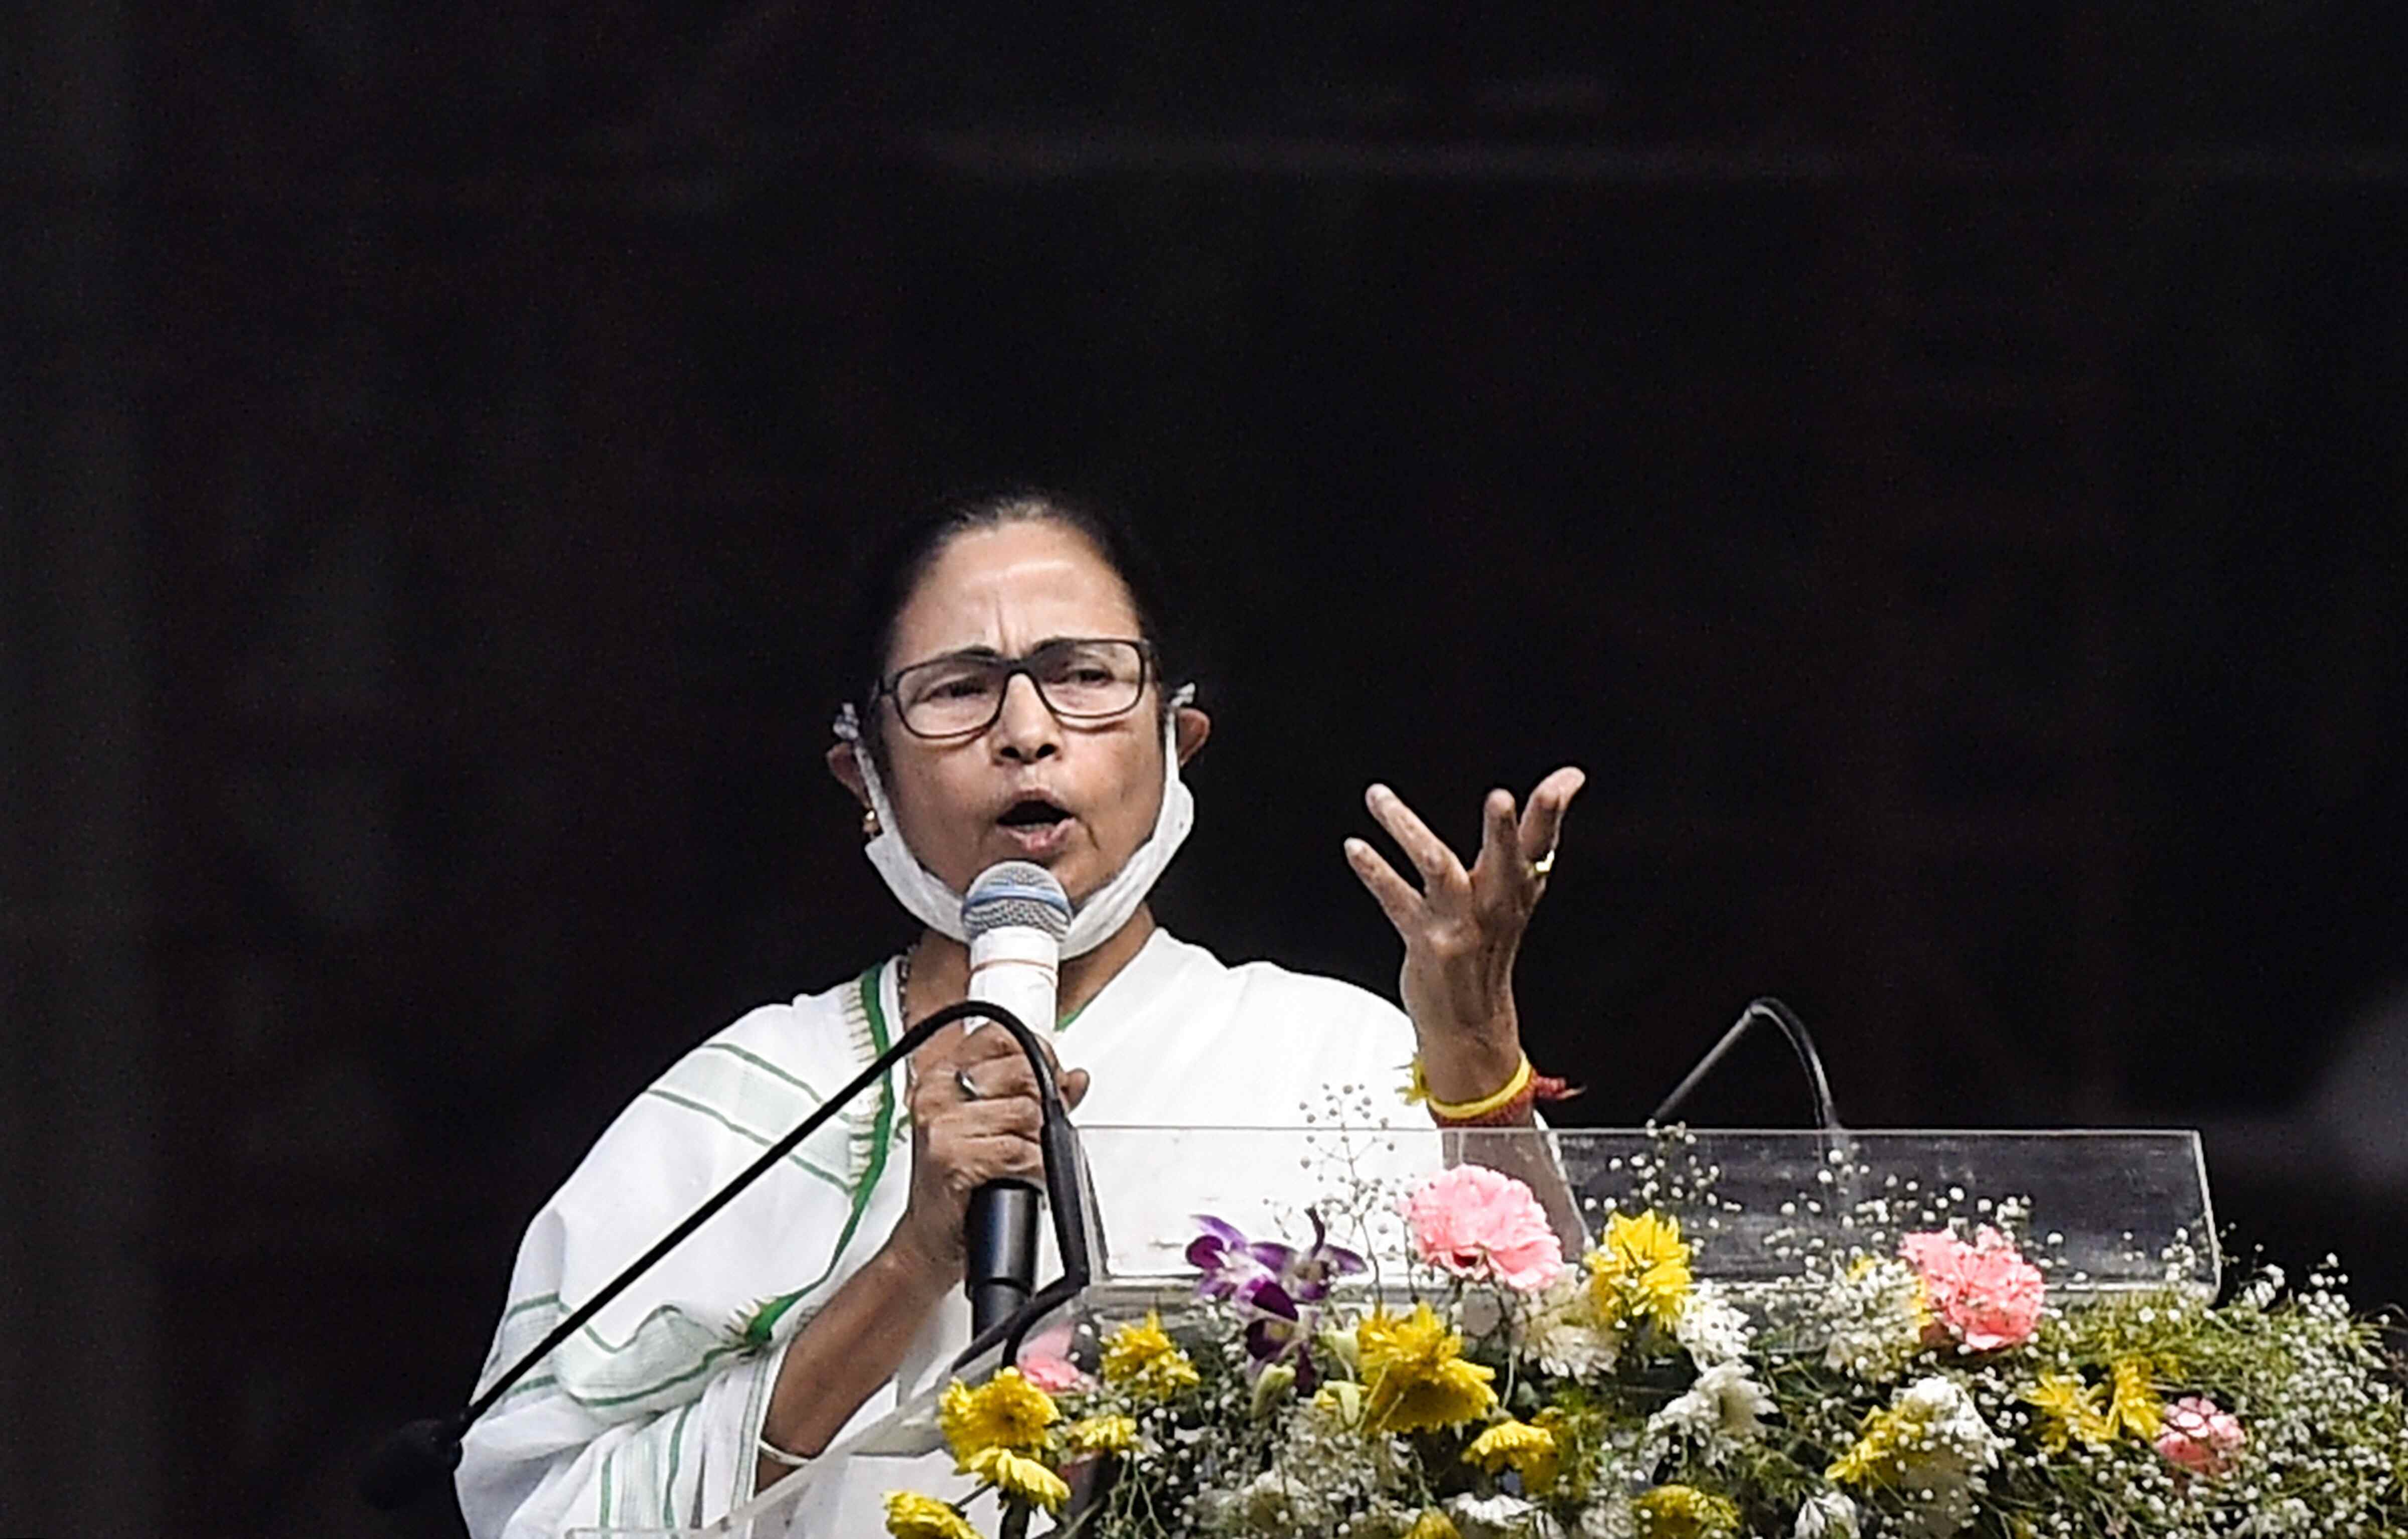 Bringing back Indian students important, but PM busy in UP poll meetings: Mamata